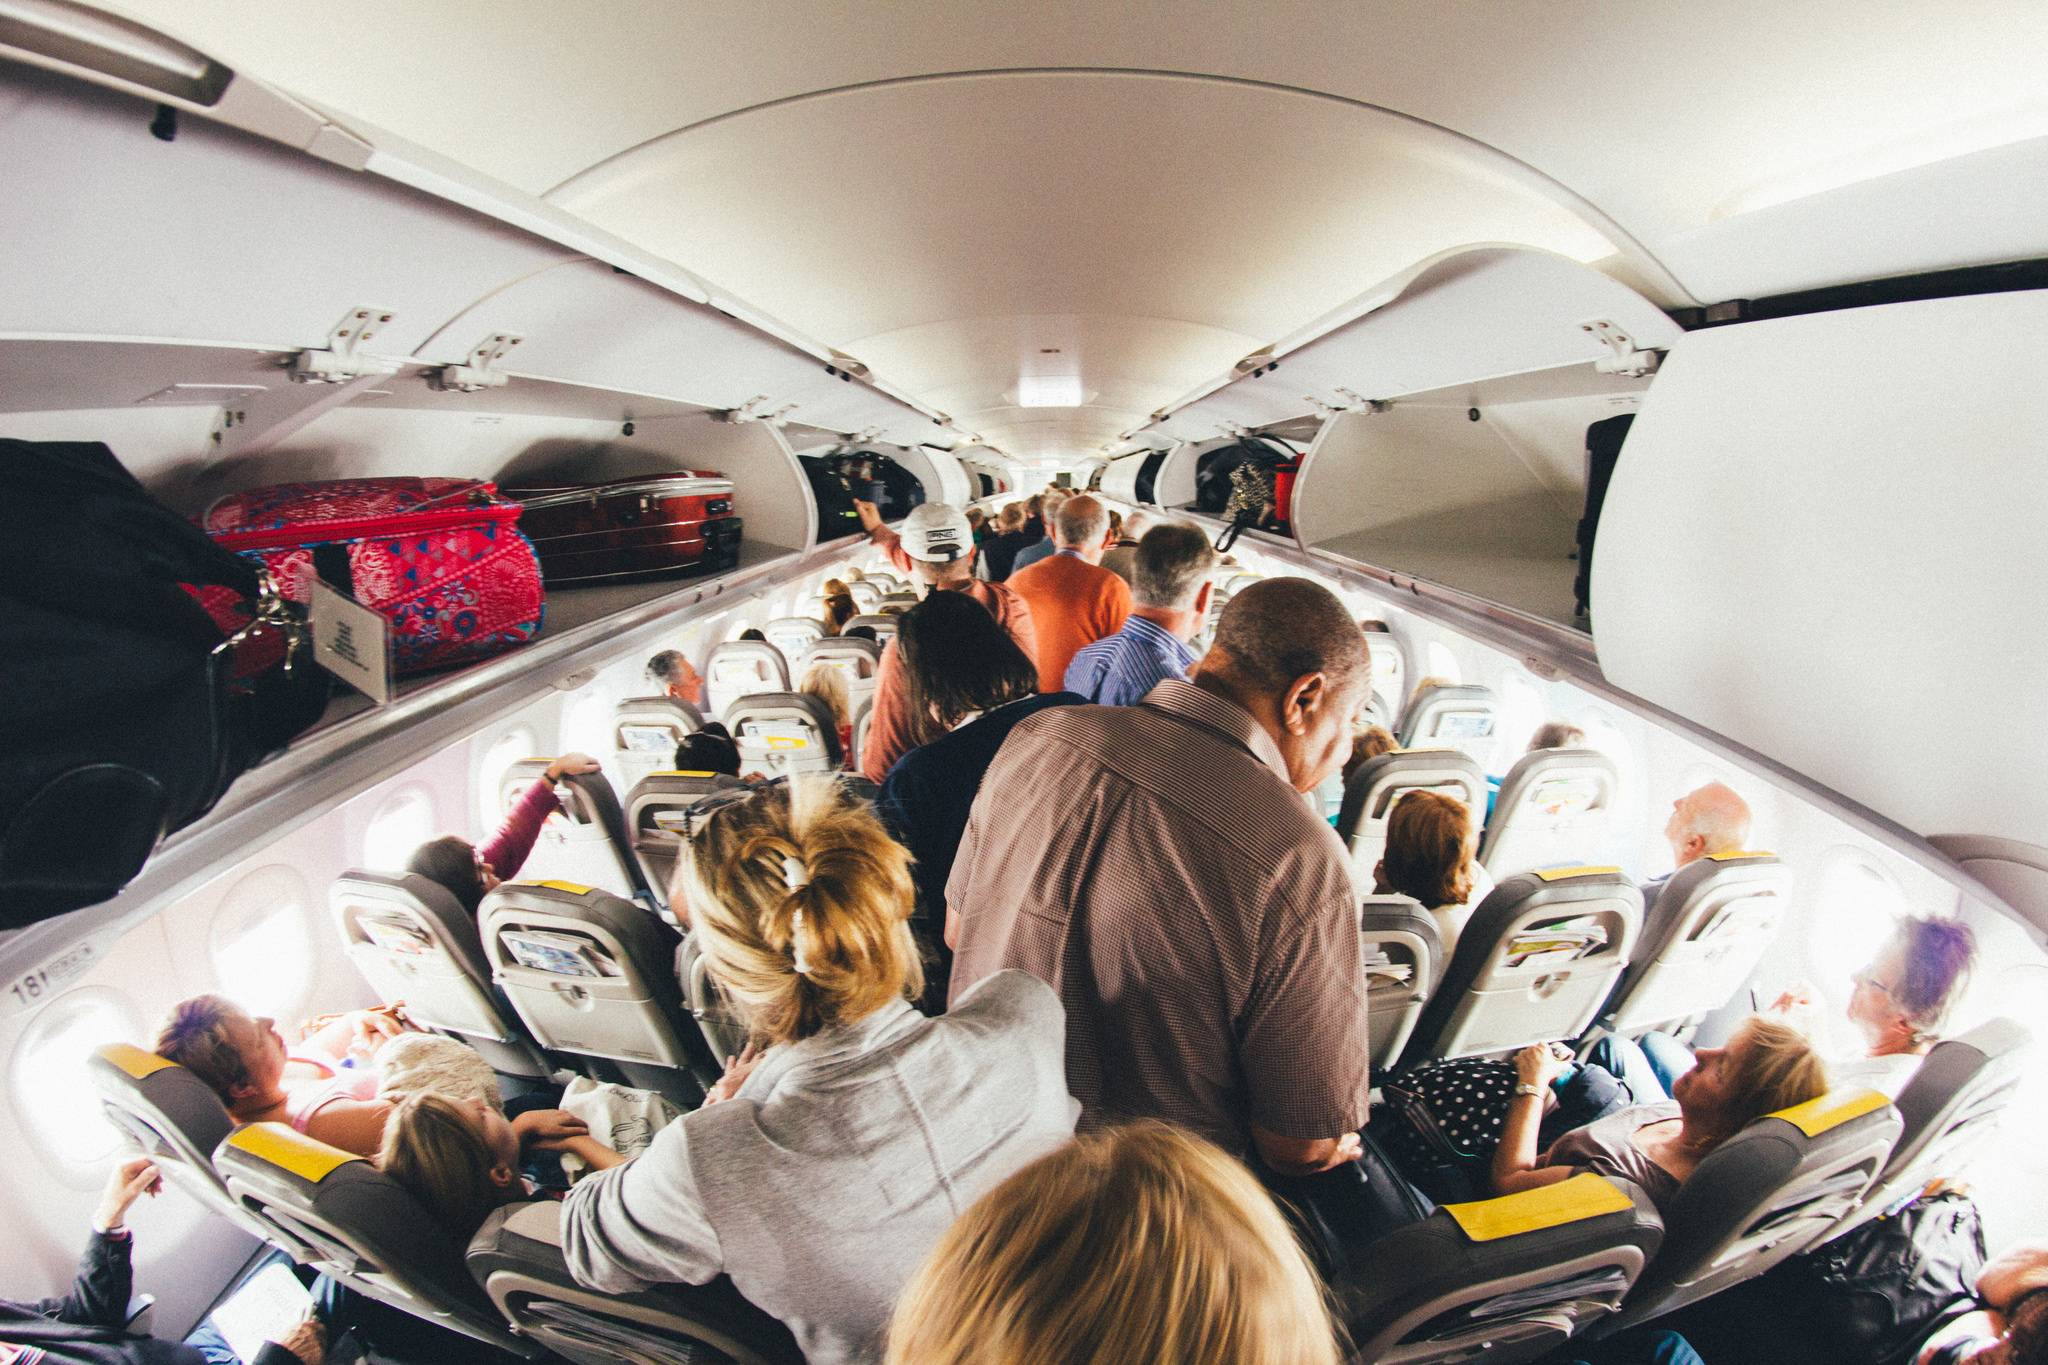 More people are behaving badly on planes